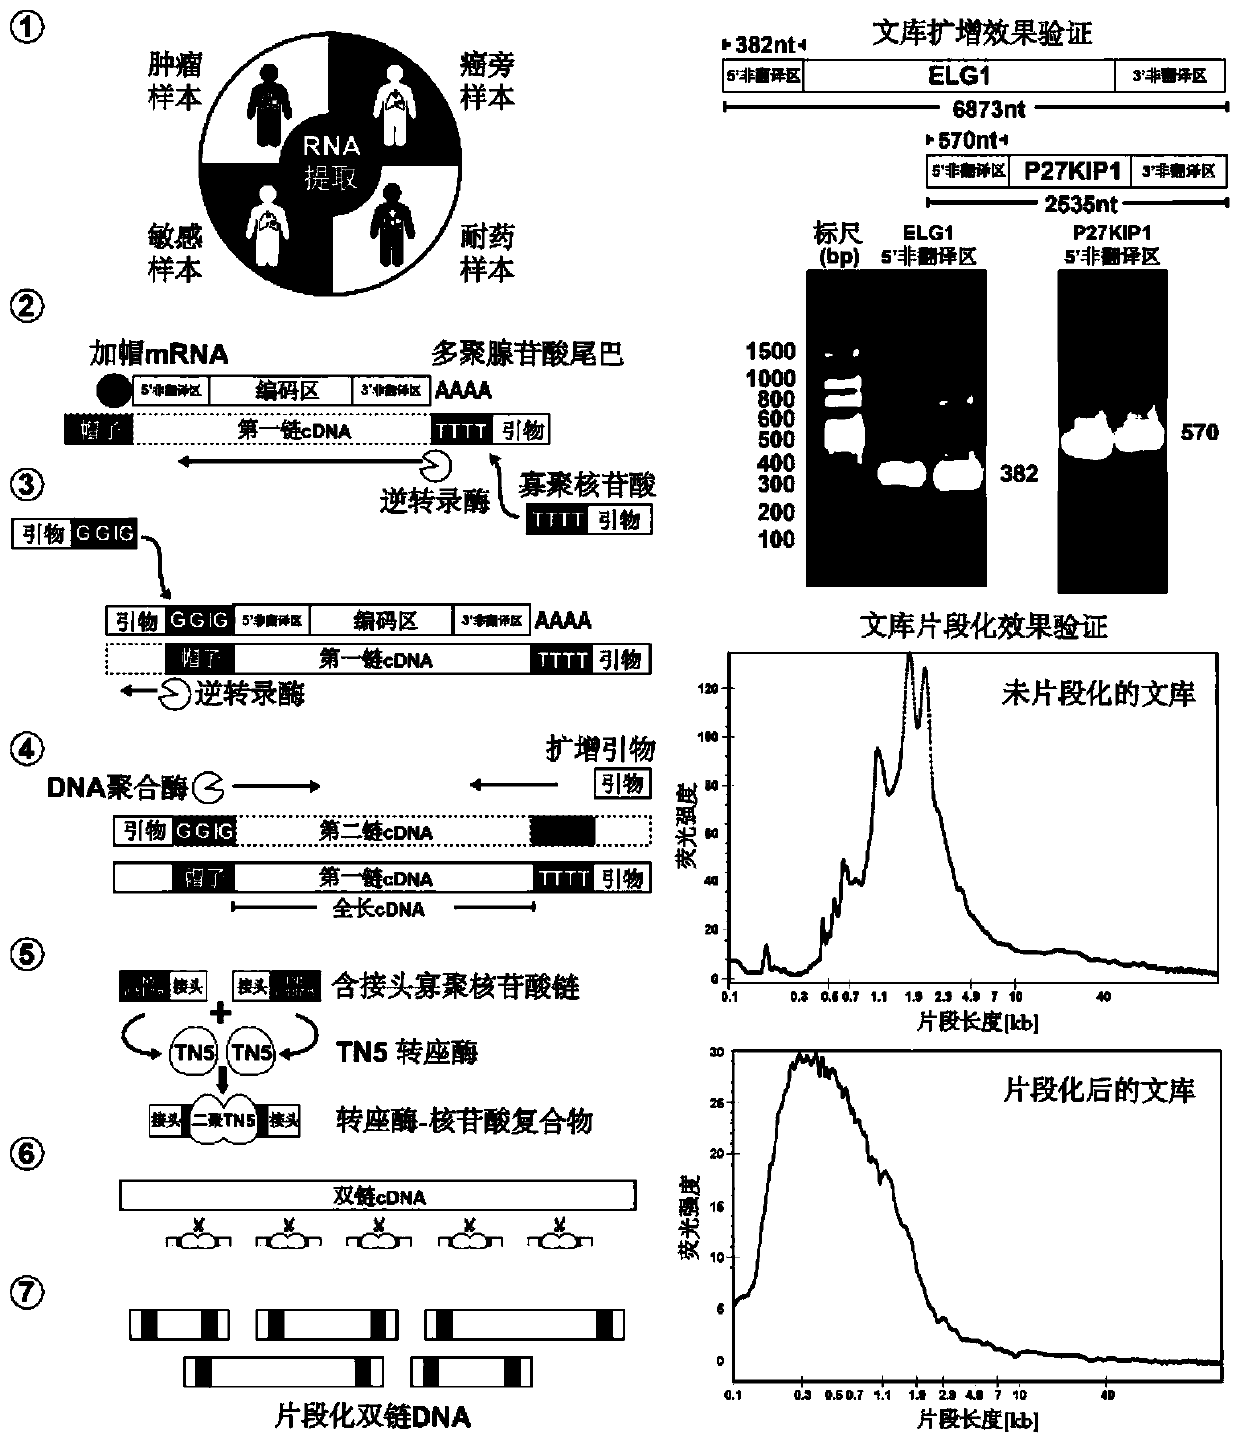 High-throughput identification method of internal ribosome entry site (IRES) elements in various source cell samples